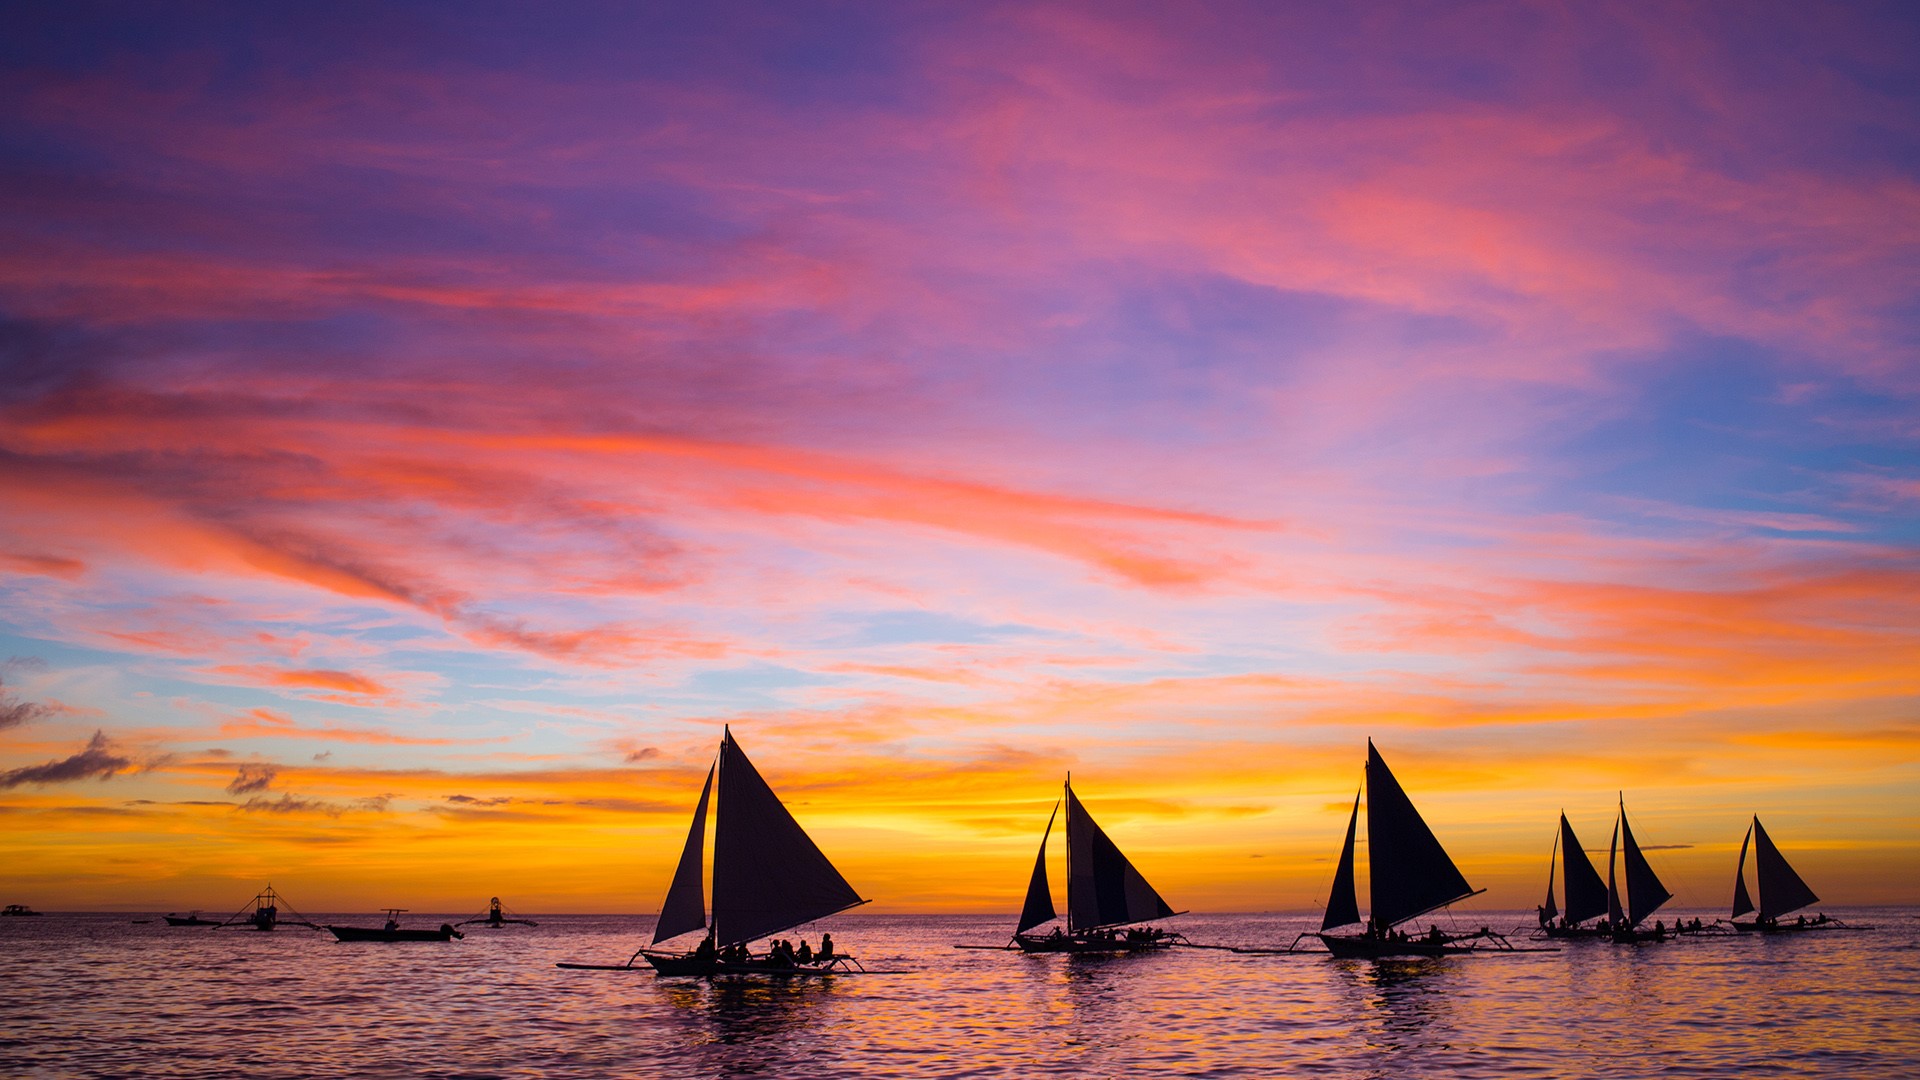 Sailing boats in the sea at sunset, Boracay, Philippines | Windows ...